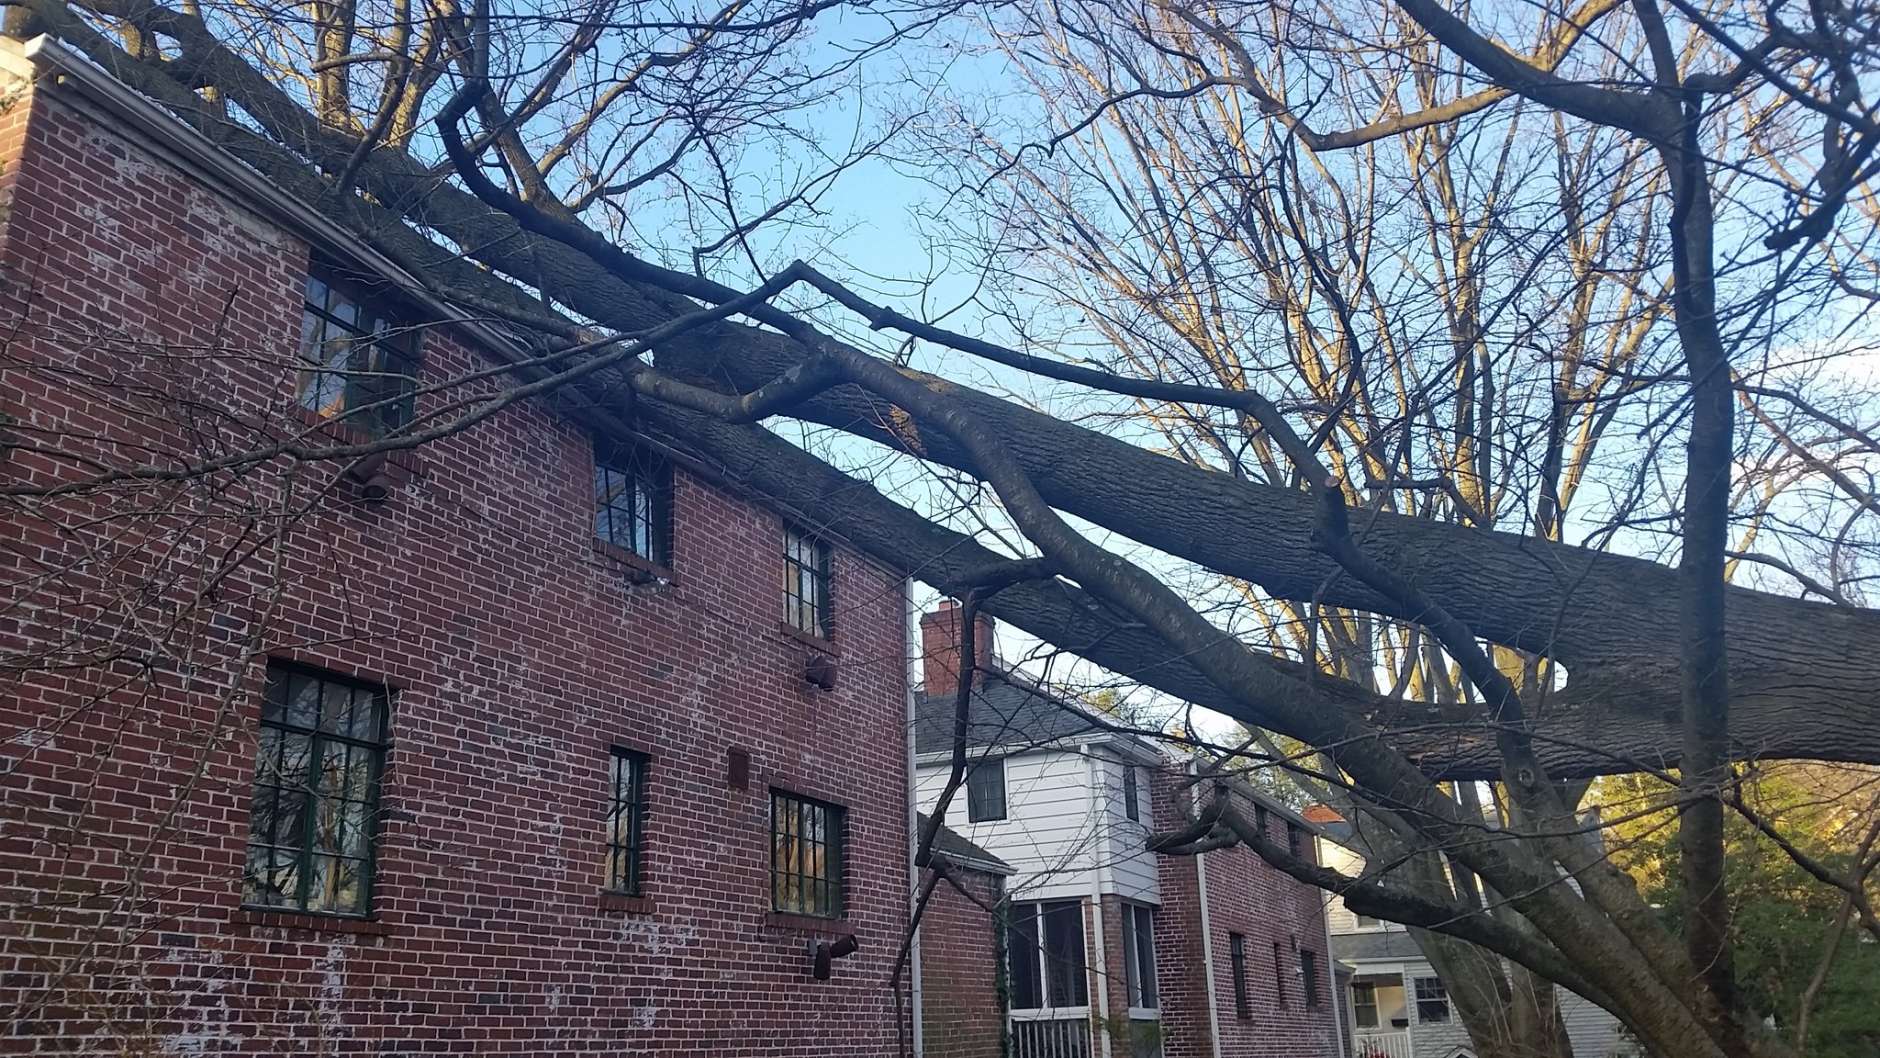 The 60 mile an hour plus winds last night toppled several trees on Thornapple Street in Chevy Chase, Maryland, hitting two separate houses. (WTOP/Kathy Stewart)